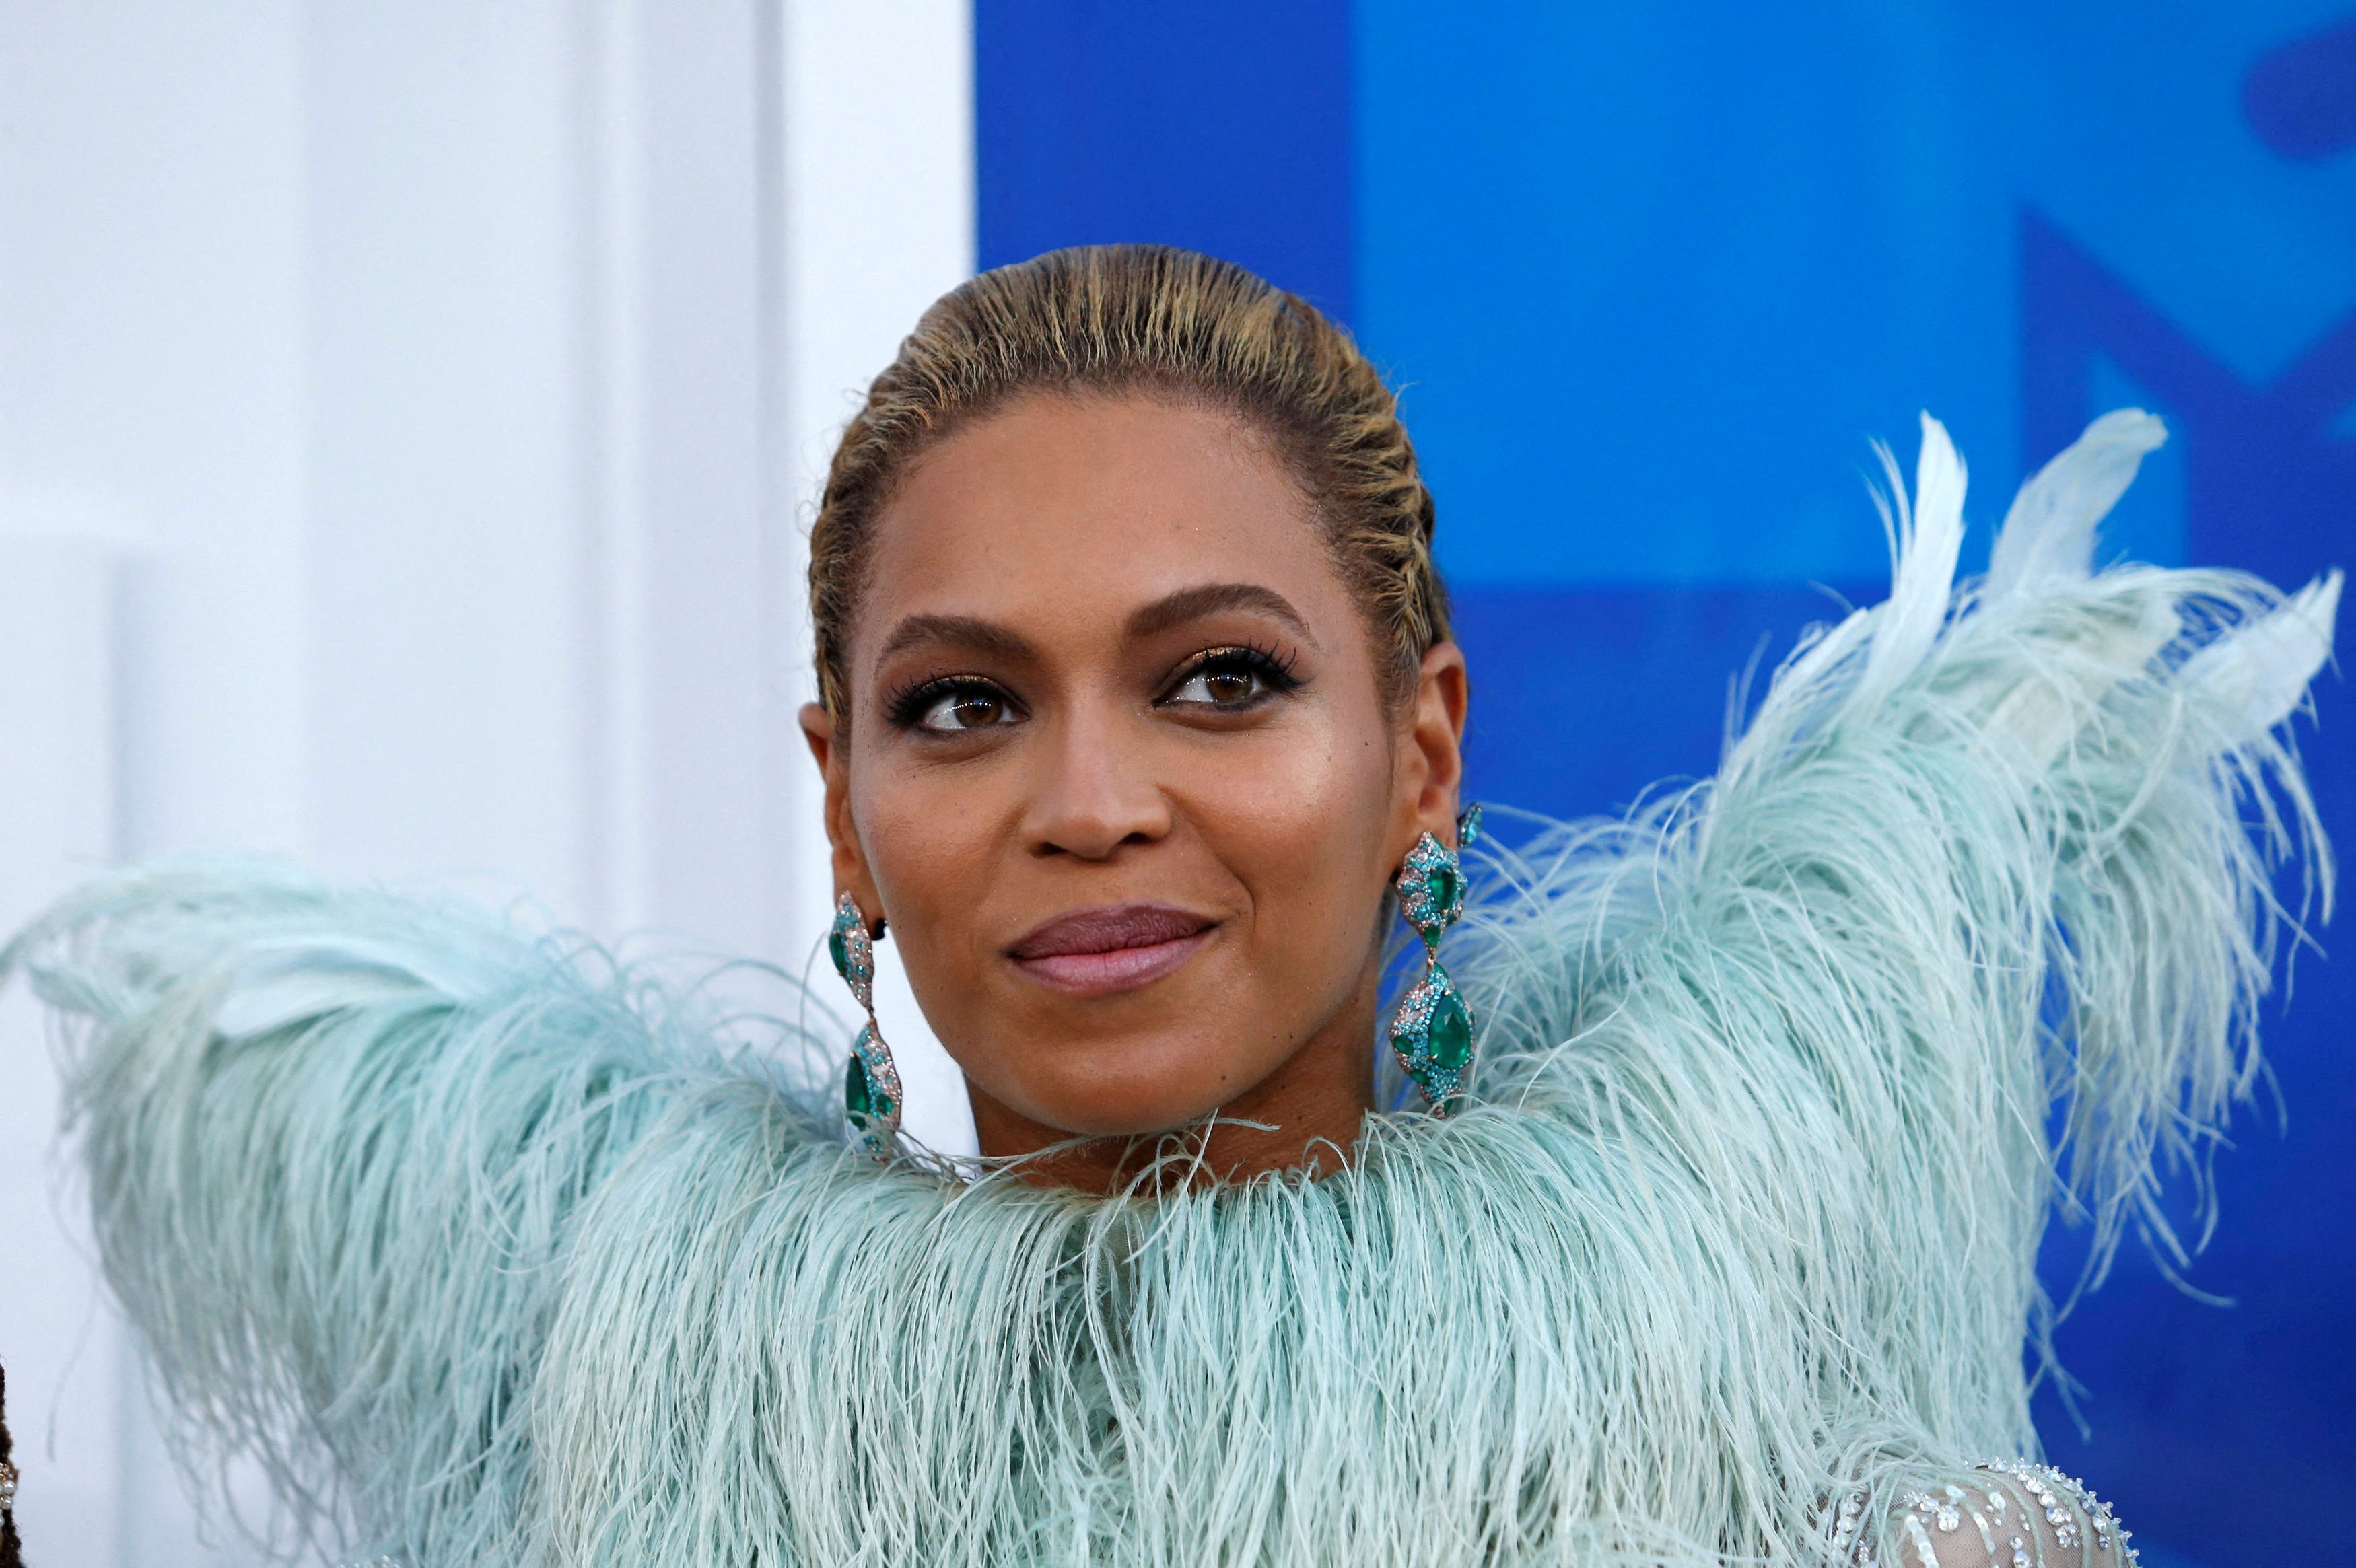 Singer Beyonce arrives at the 2016 MTV Video Music Awards in New York